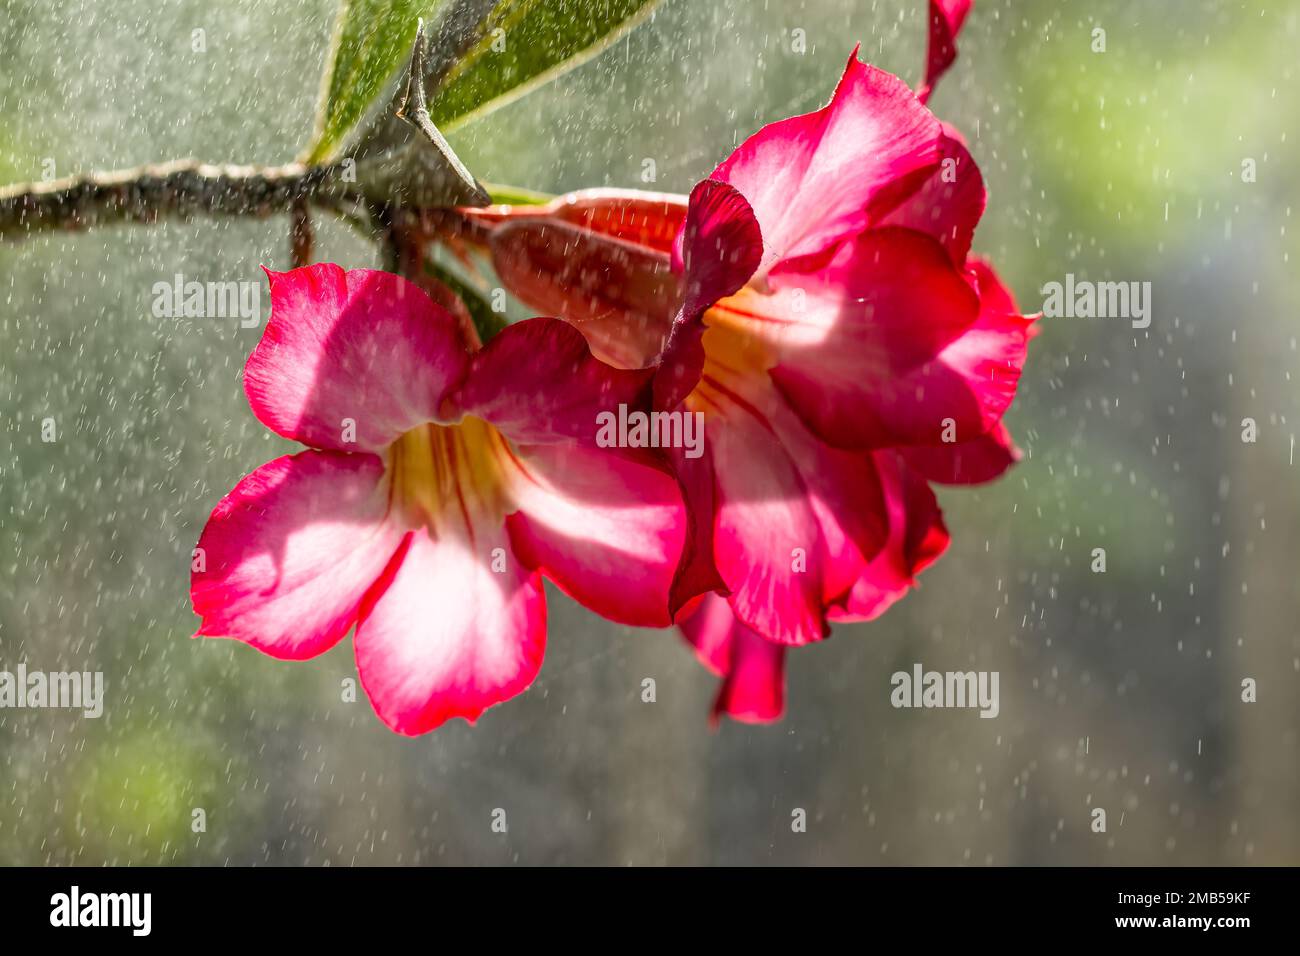 A pink adenium flower (adenium obesum) that is blooming is drenched in drizzling rain, the background of blurry green leaves and mist and soft raindro Stock Photo